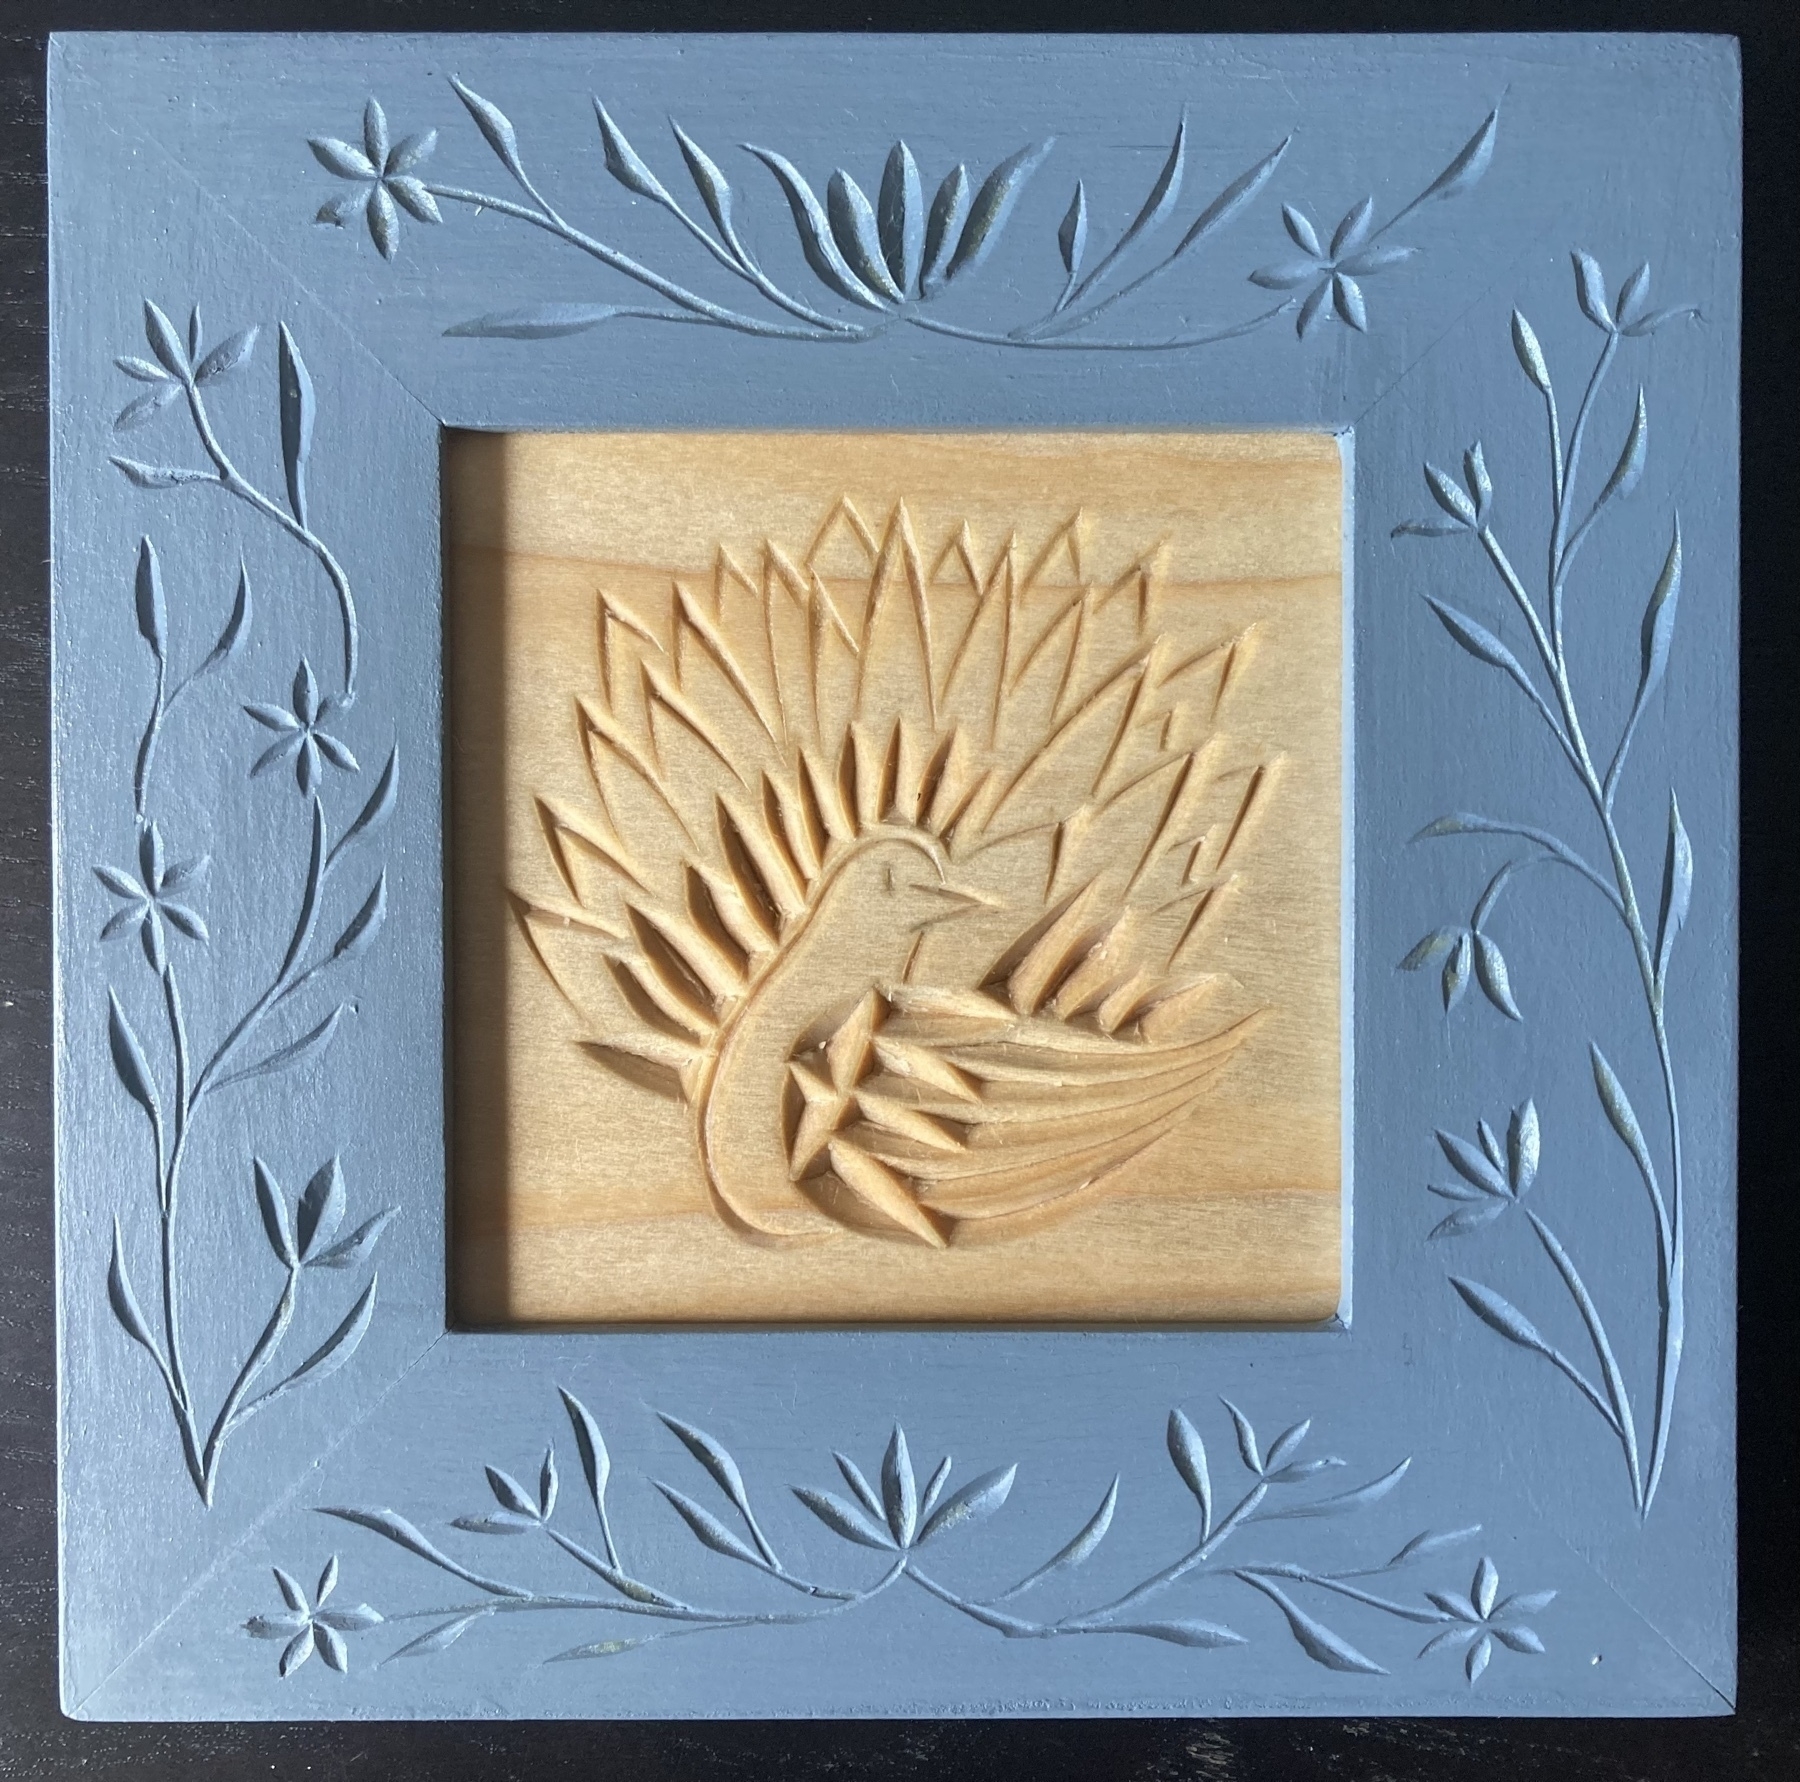 chip carving of, at least iconographically, a peacock, in a frame carved with flowers and painted light blue